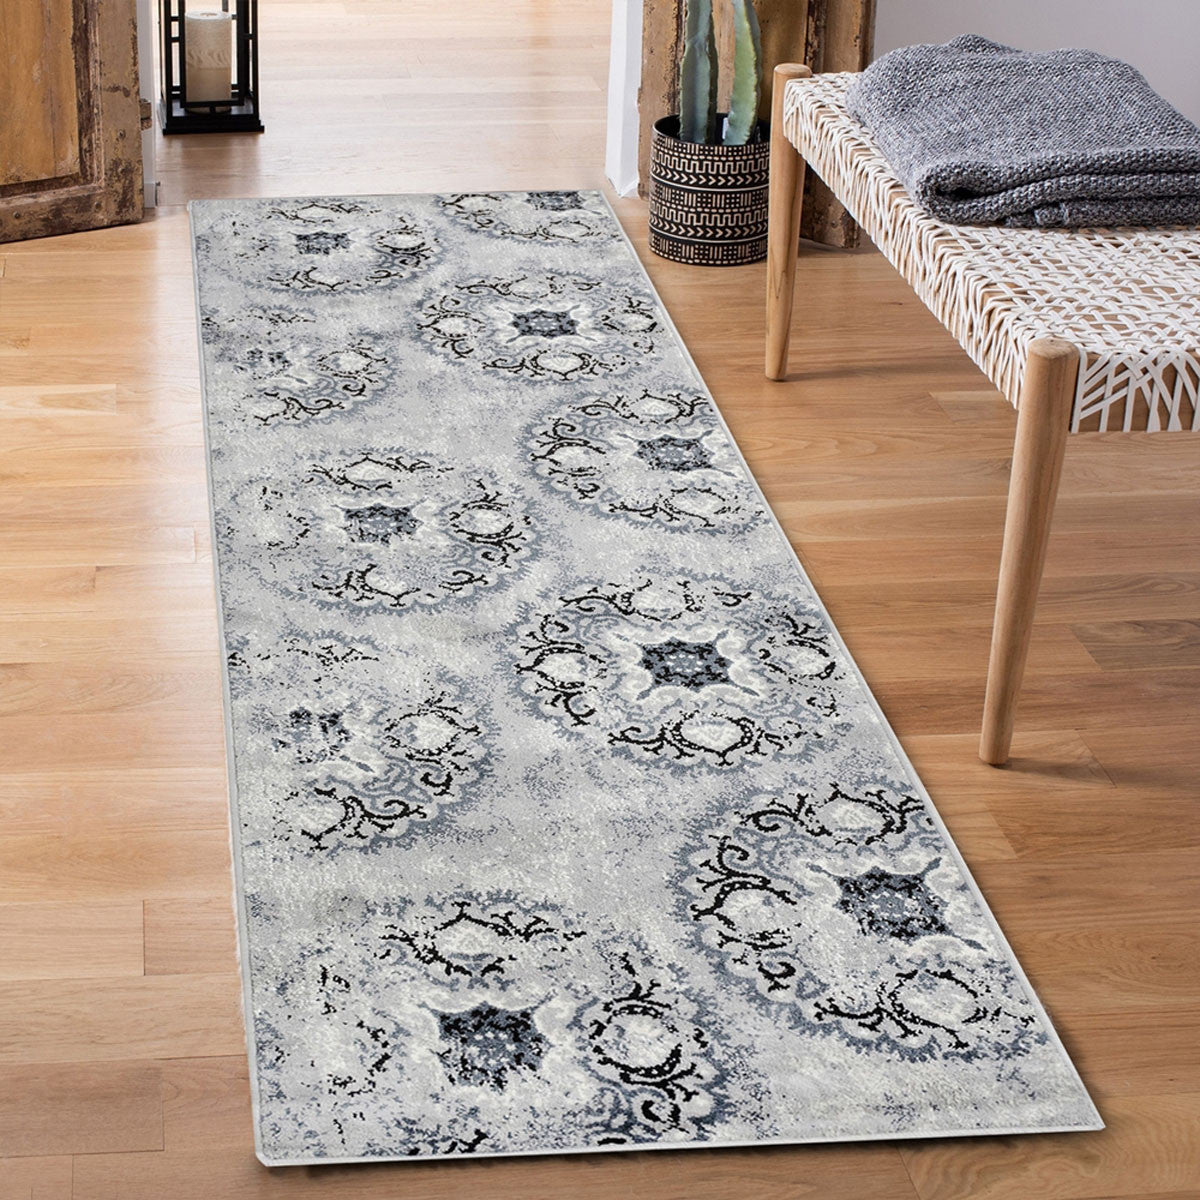 8' Silver And Gray Geometric Medallion Stain Resistant Runner Rug